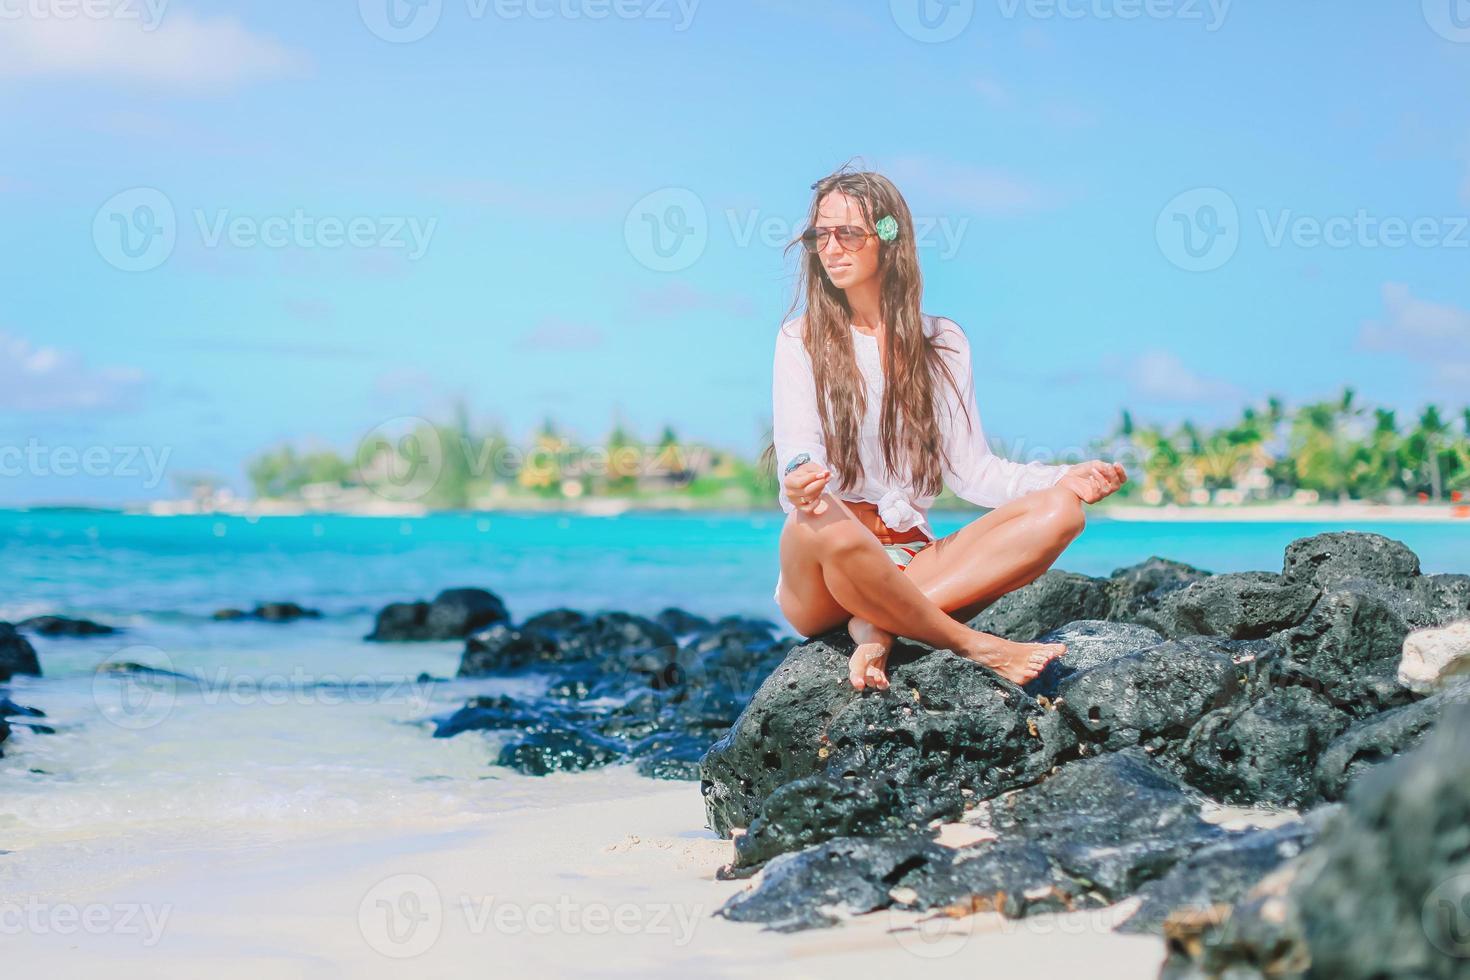 Beautiful girl in yoga position during tropical vacation photo